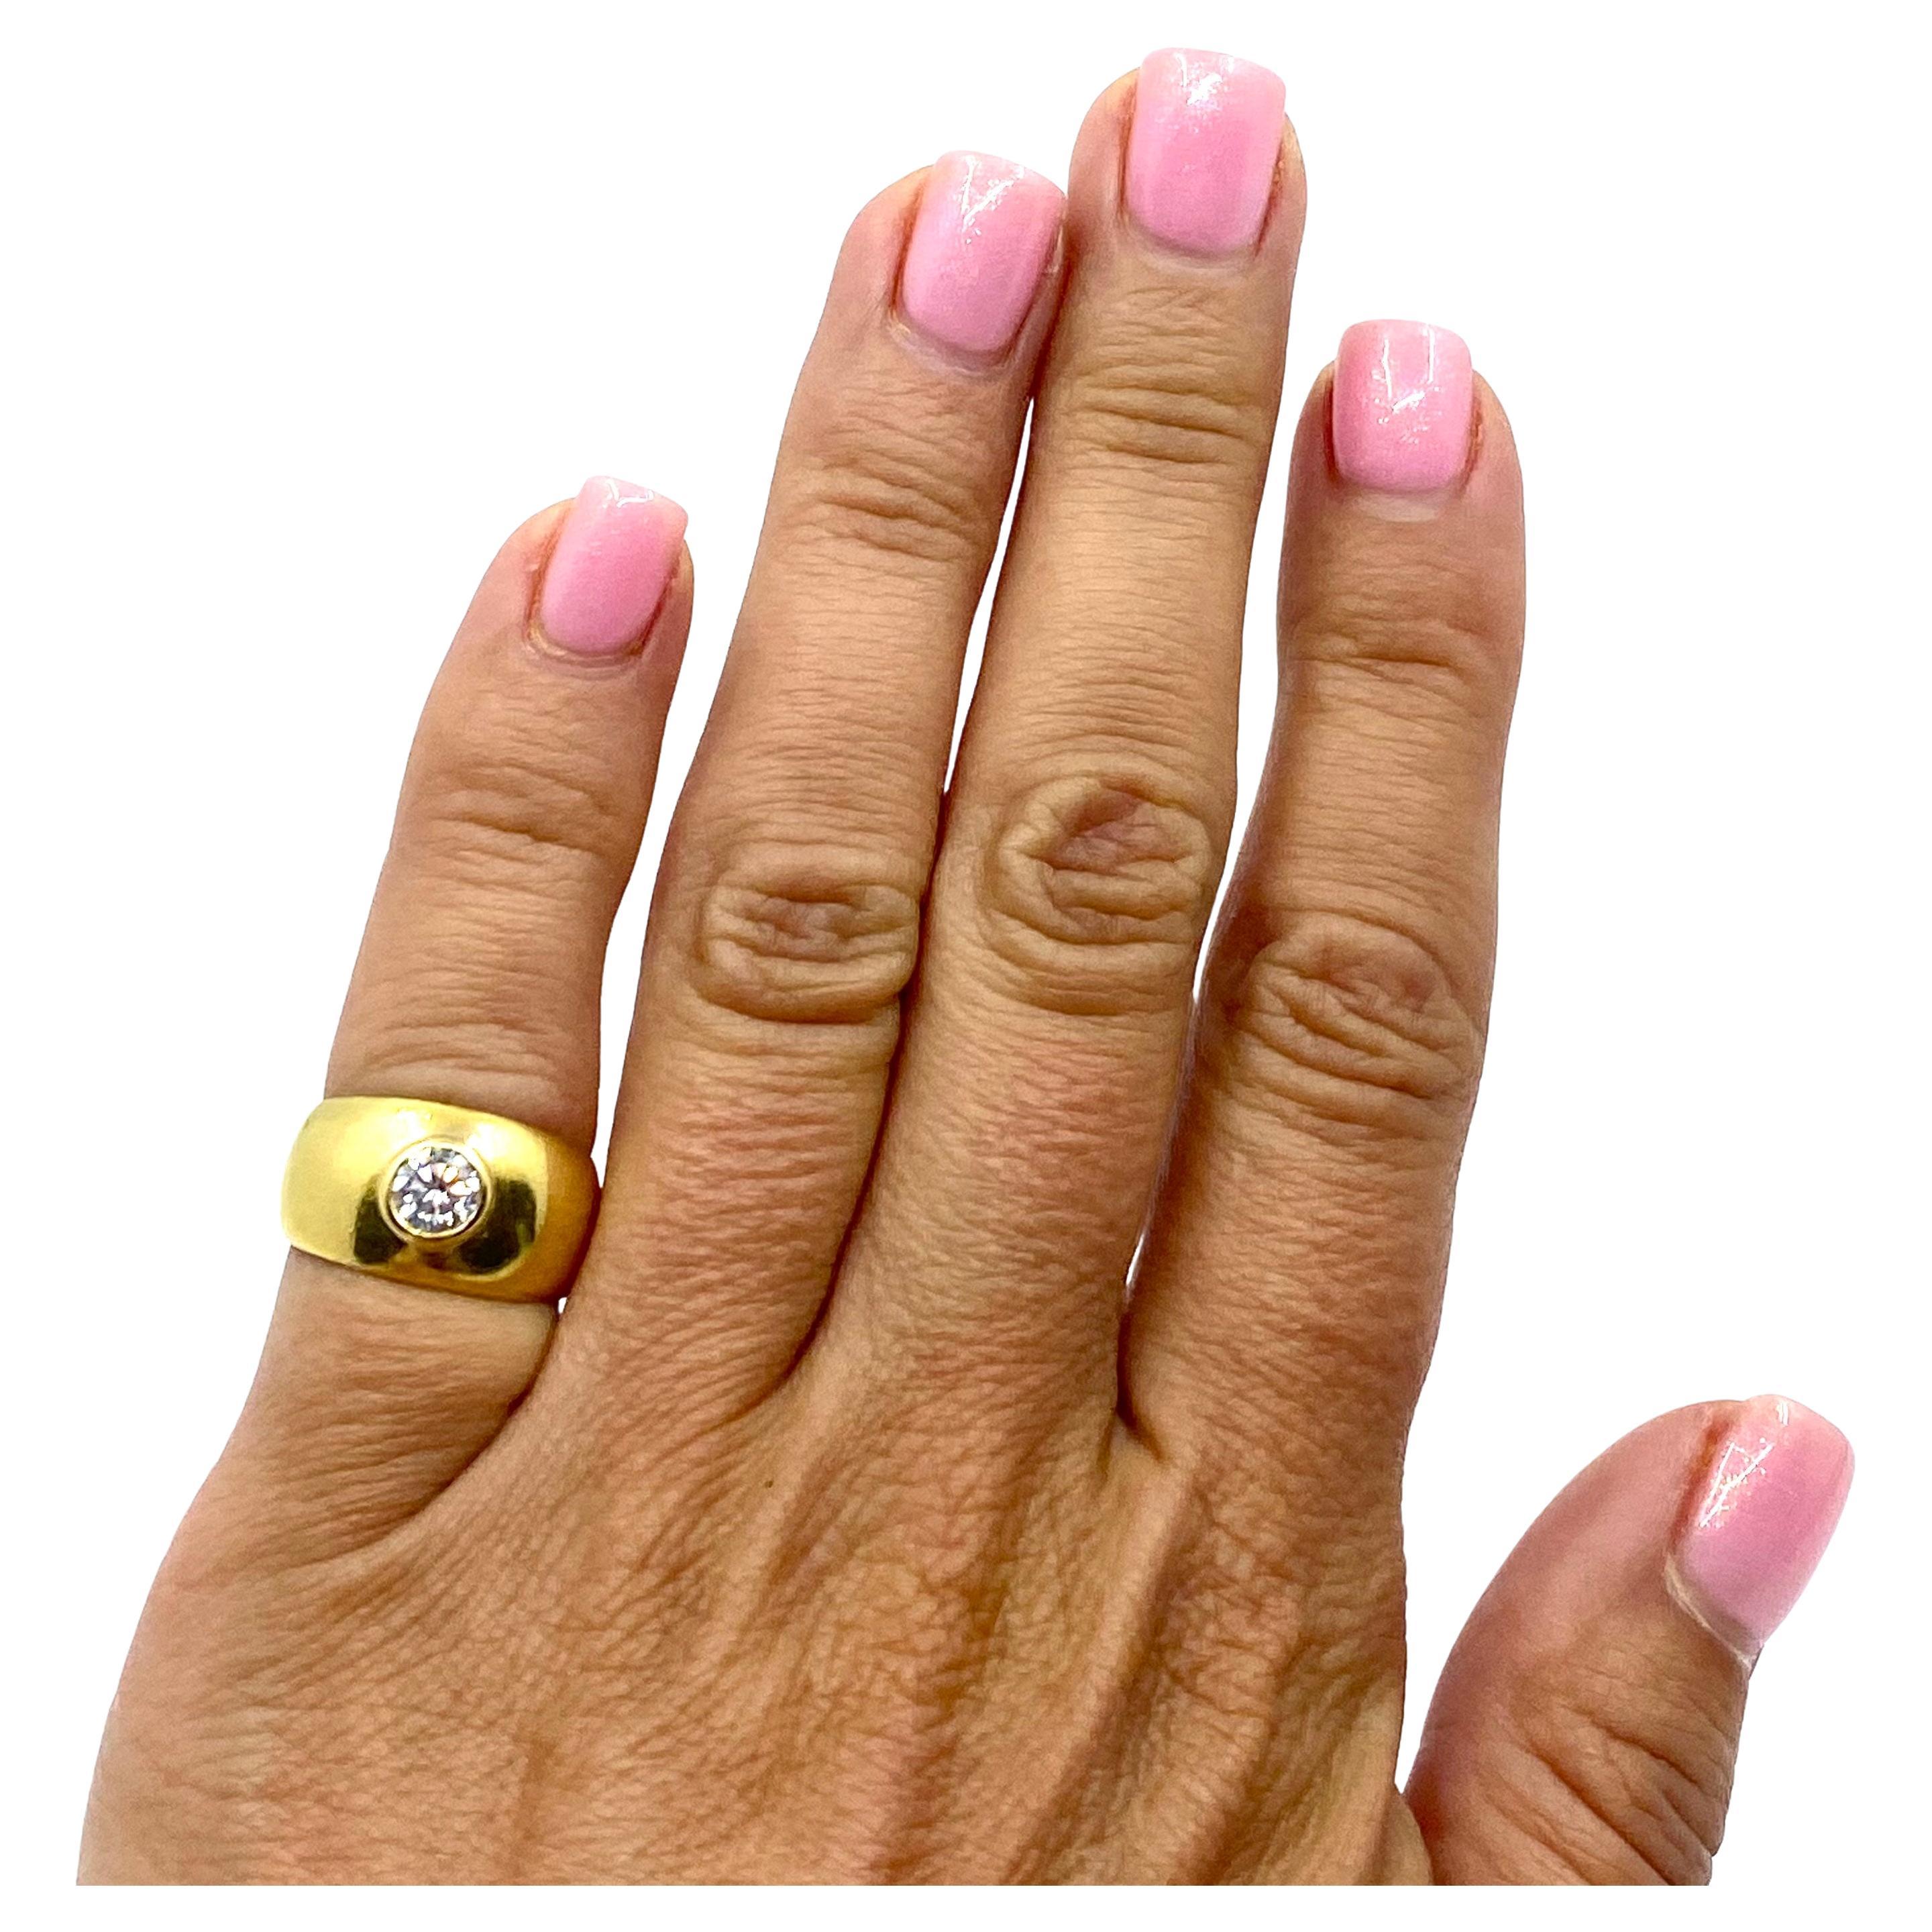 A vintage solitaire ring made of 18k gold, features diamond.
This great gold band of minimal design can be a perfect pinky ring.
The diamond is bezel set and flush mounted that makes it appear bigger. The ring has a distinct
vintage feel and is very